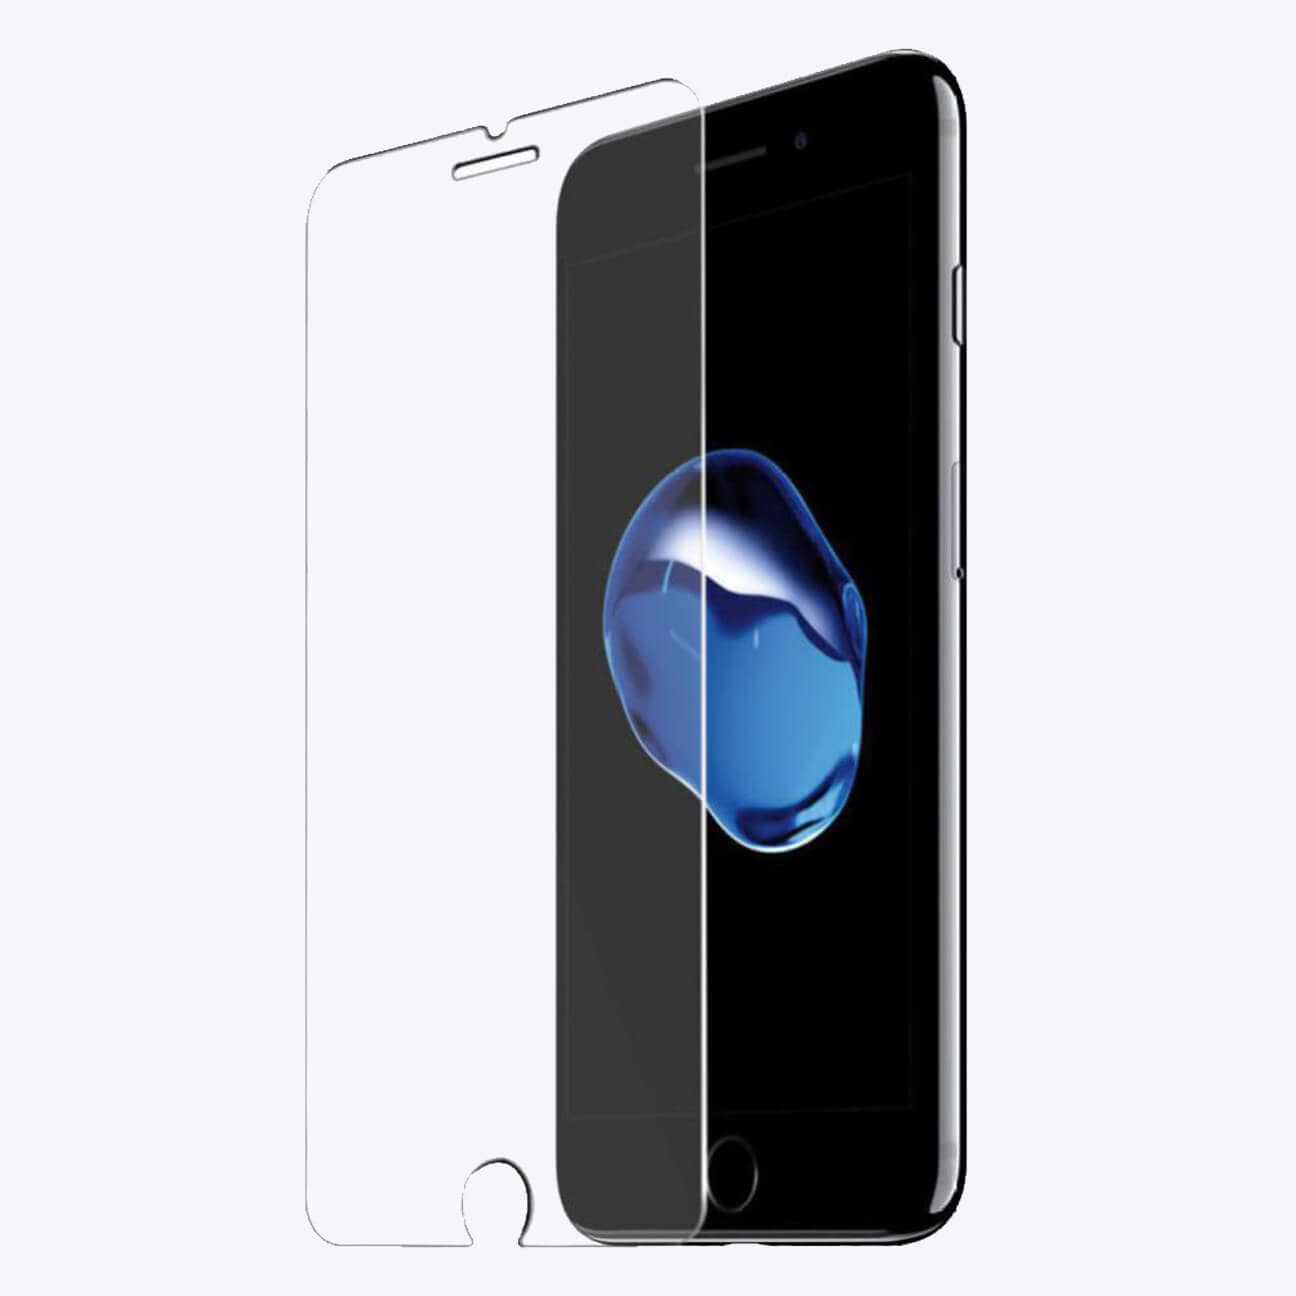 Oppo Reno 10X Zoom Tempered Glass Screen Protector